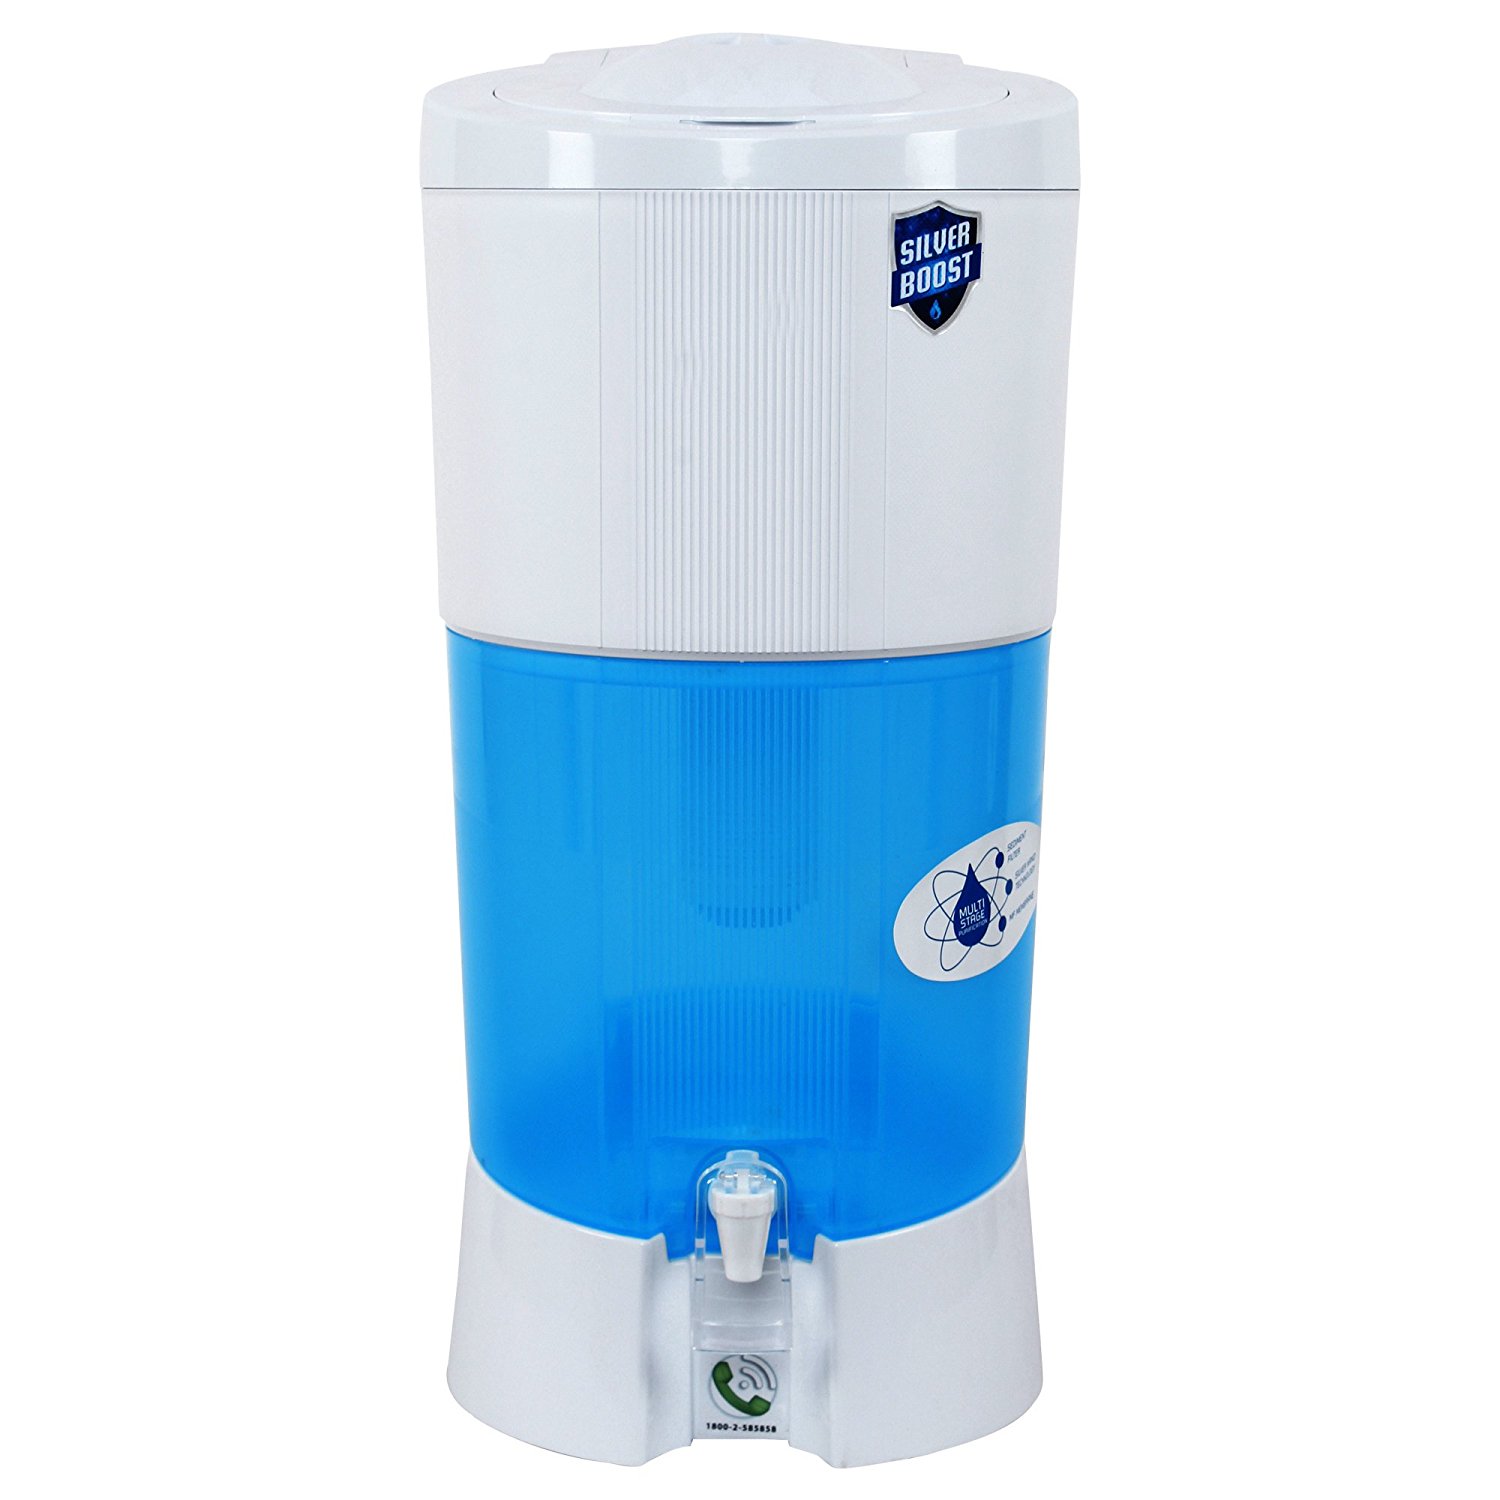 Tata Swach Bulb 3000 Litres  Review